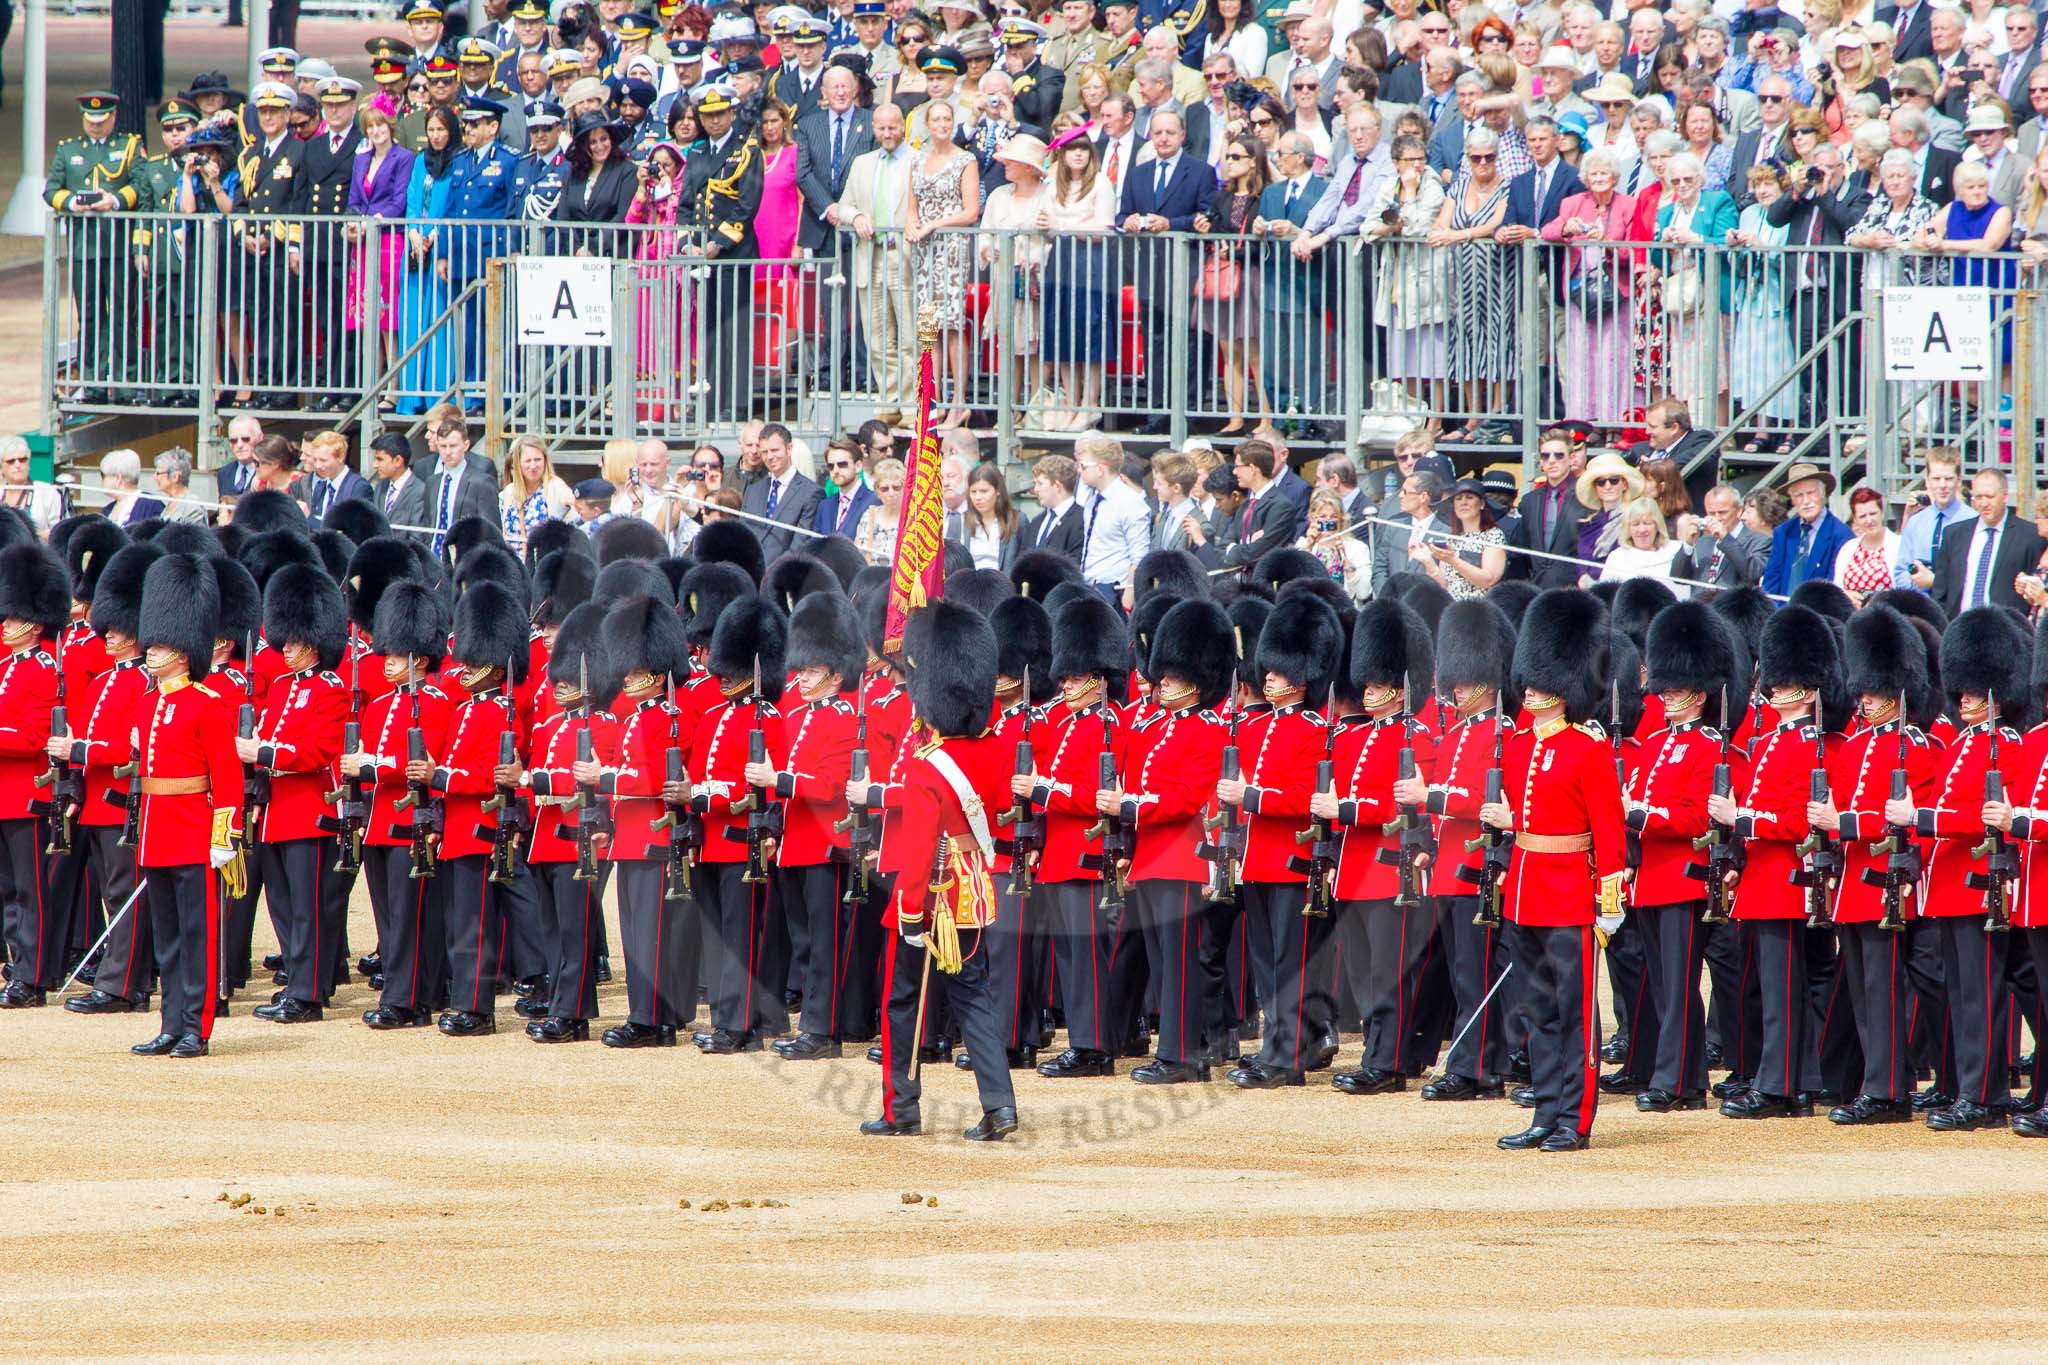 Trooping the Colour 2014.
Horse Guards Parade, Westminster,
London SW1A,

United Kingdom,
on 14 June 2014 at 11:26, image #560